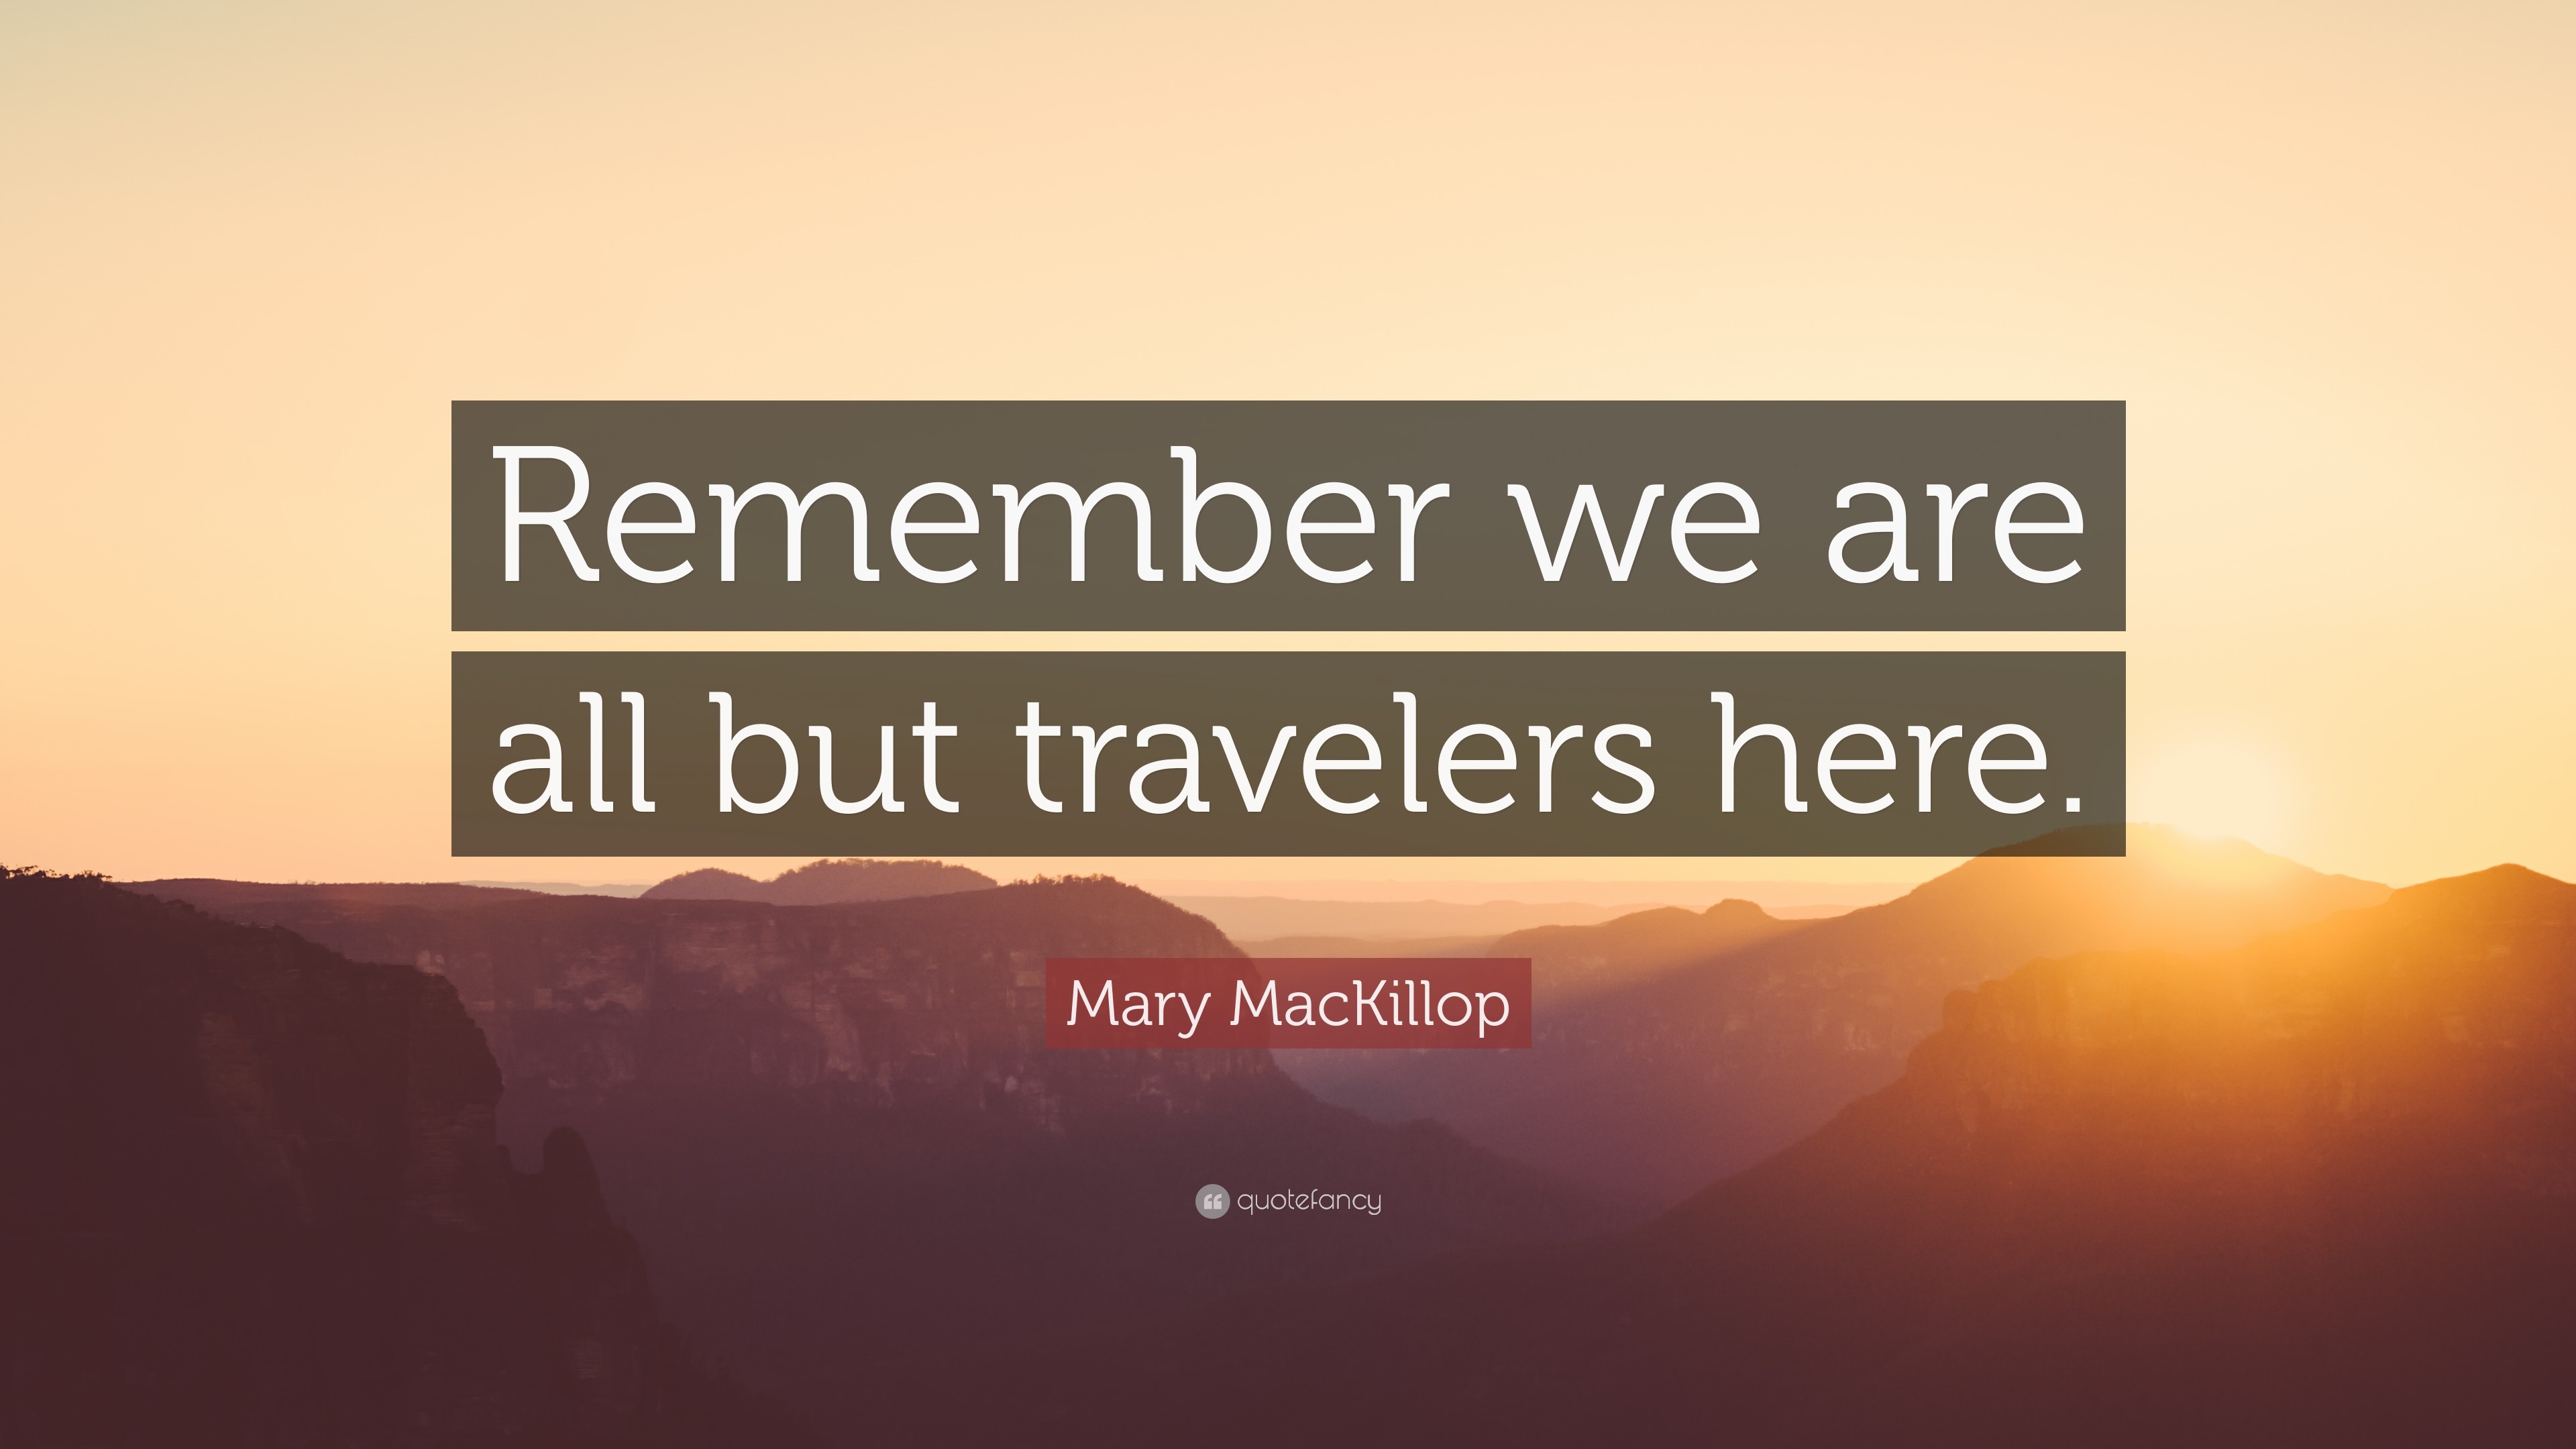 Mary MacKillop Quote.jpg